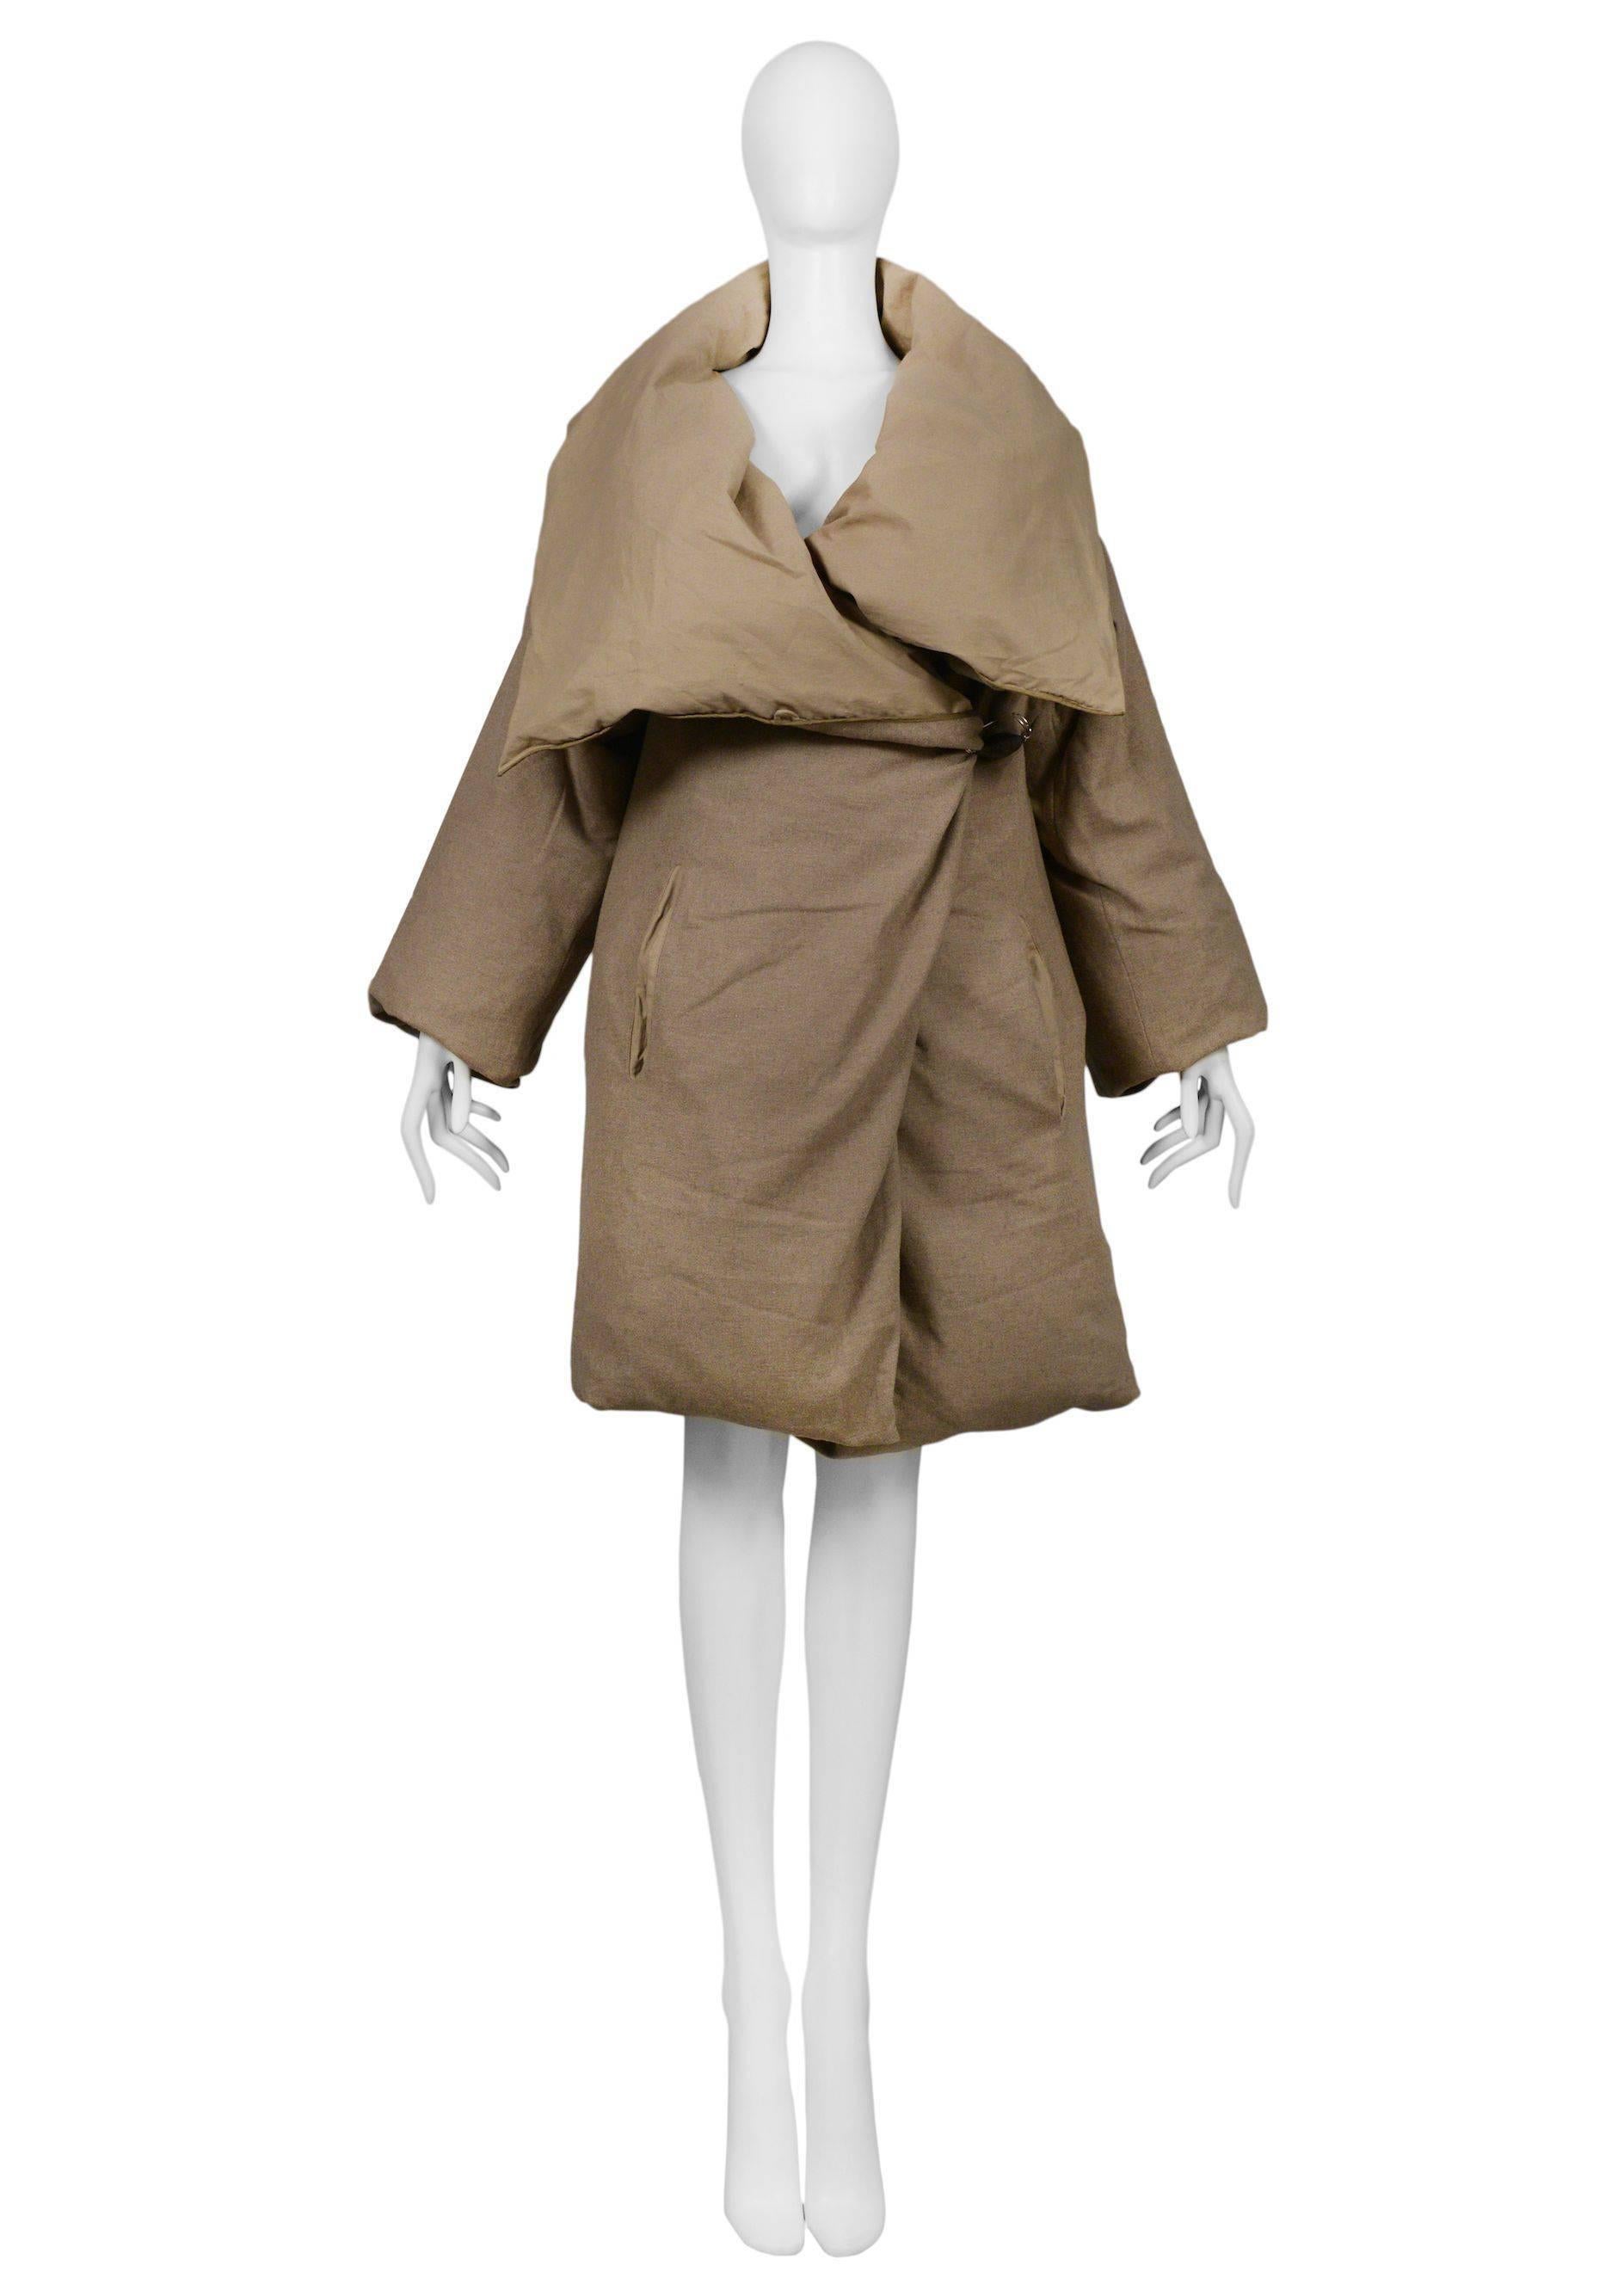 Original Maison Martin Margiela Duvet Coat made from a Featherlite 100% down filled duvet featuring a rare olive colored Duvet Coat cover with leather wrapped safety pin closure. Coat can be worn without cover which looks identical to Off White